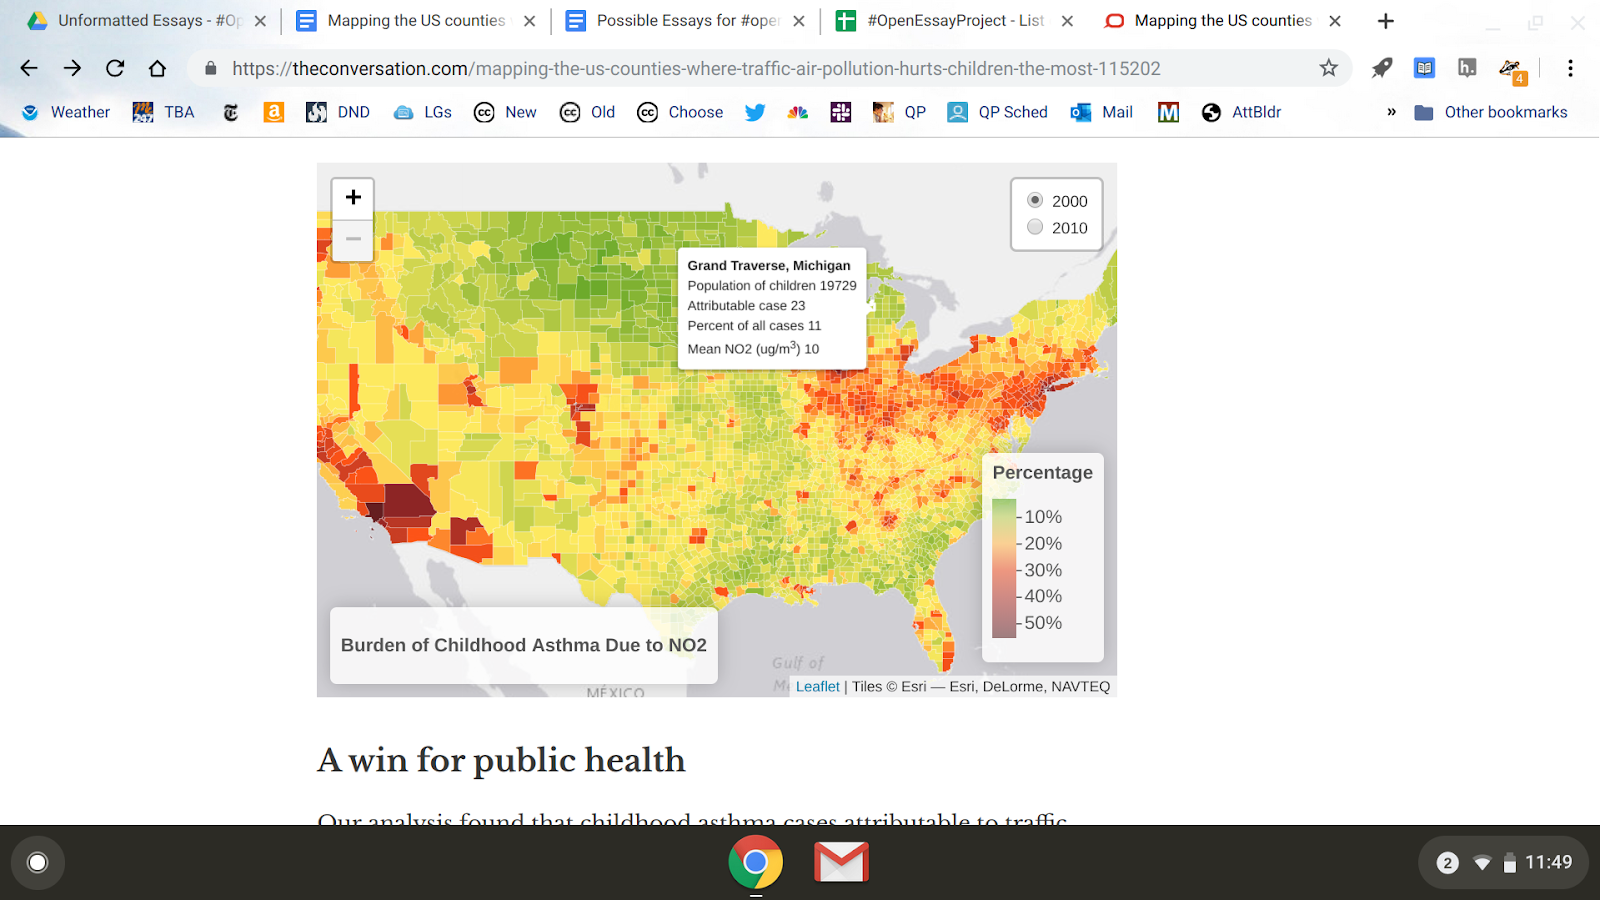 Image of a map of the United States color coded to display the burden of childhood asthma due to NO2